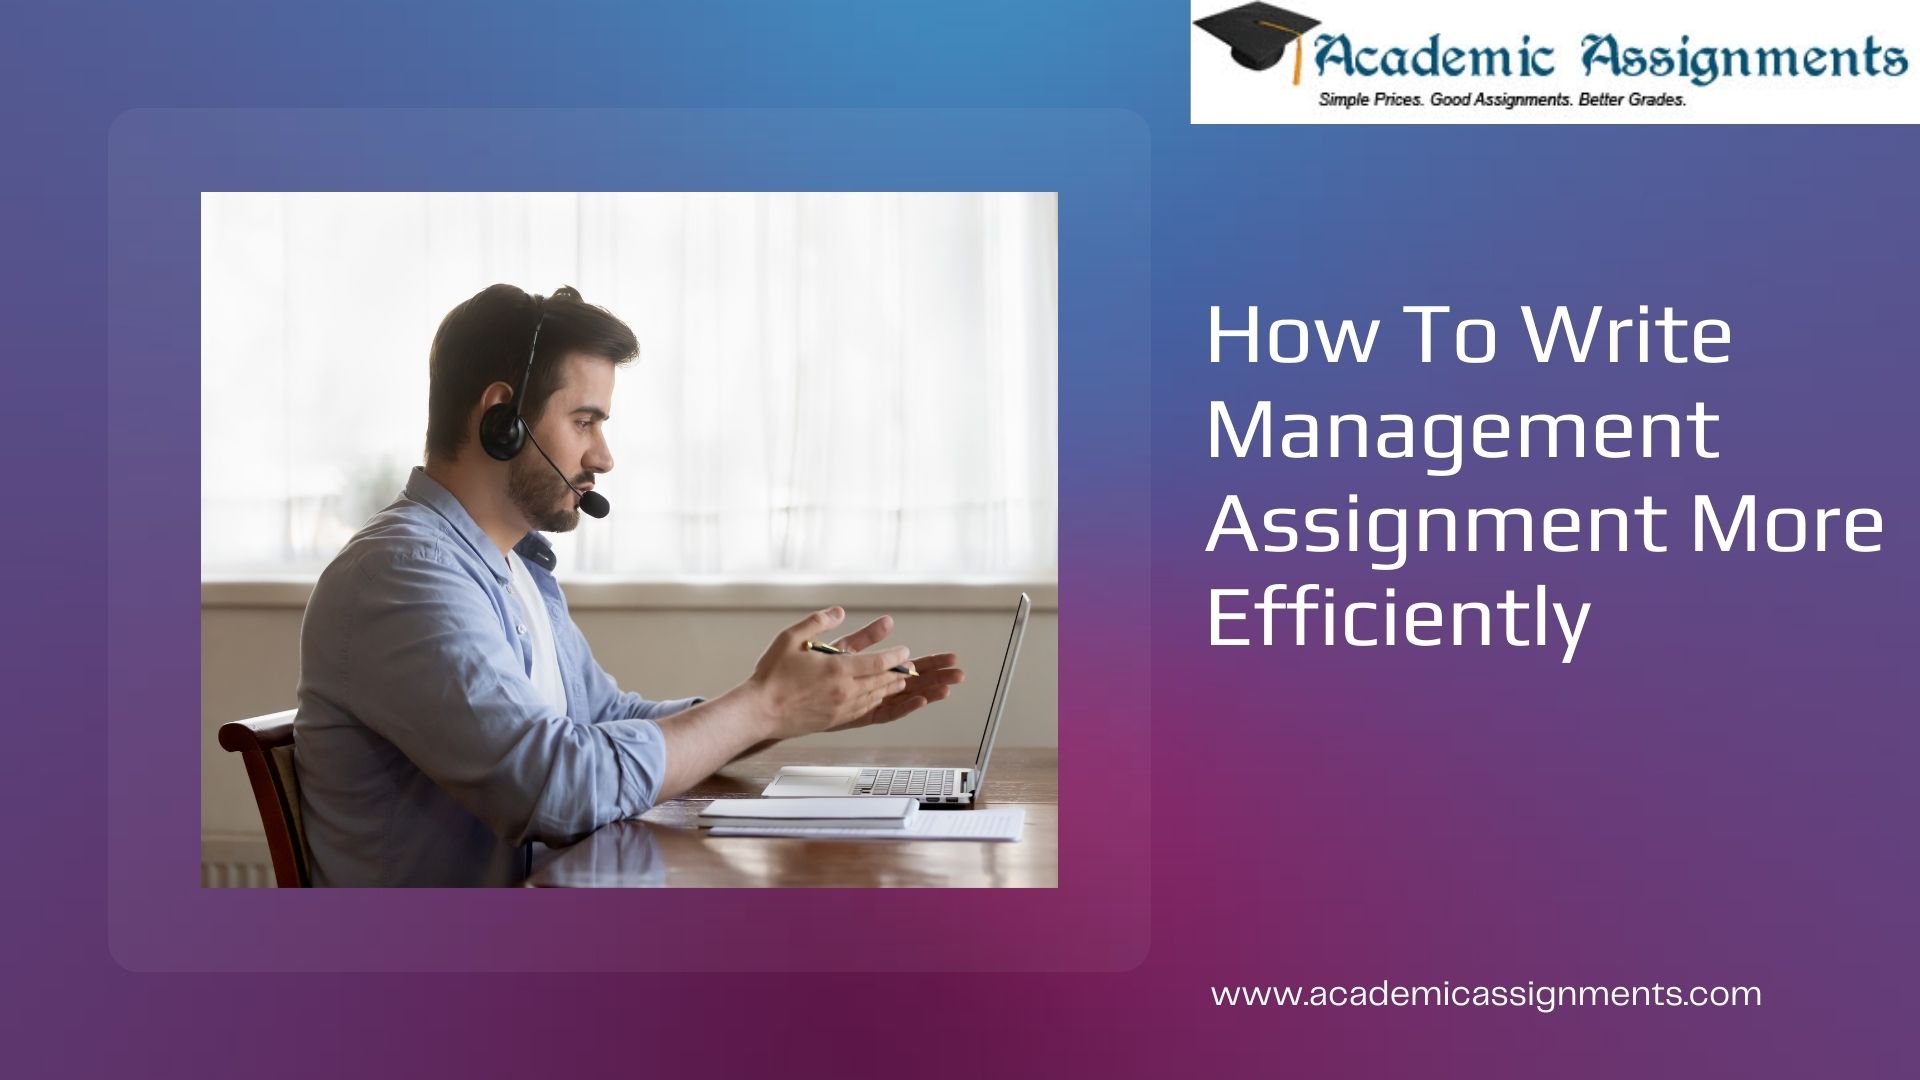 How To Write Management Assignment